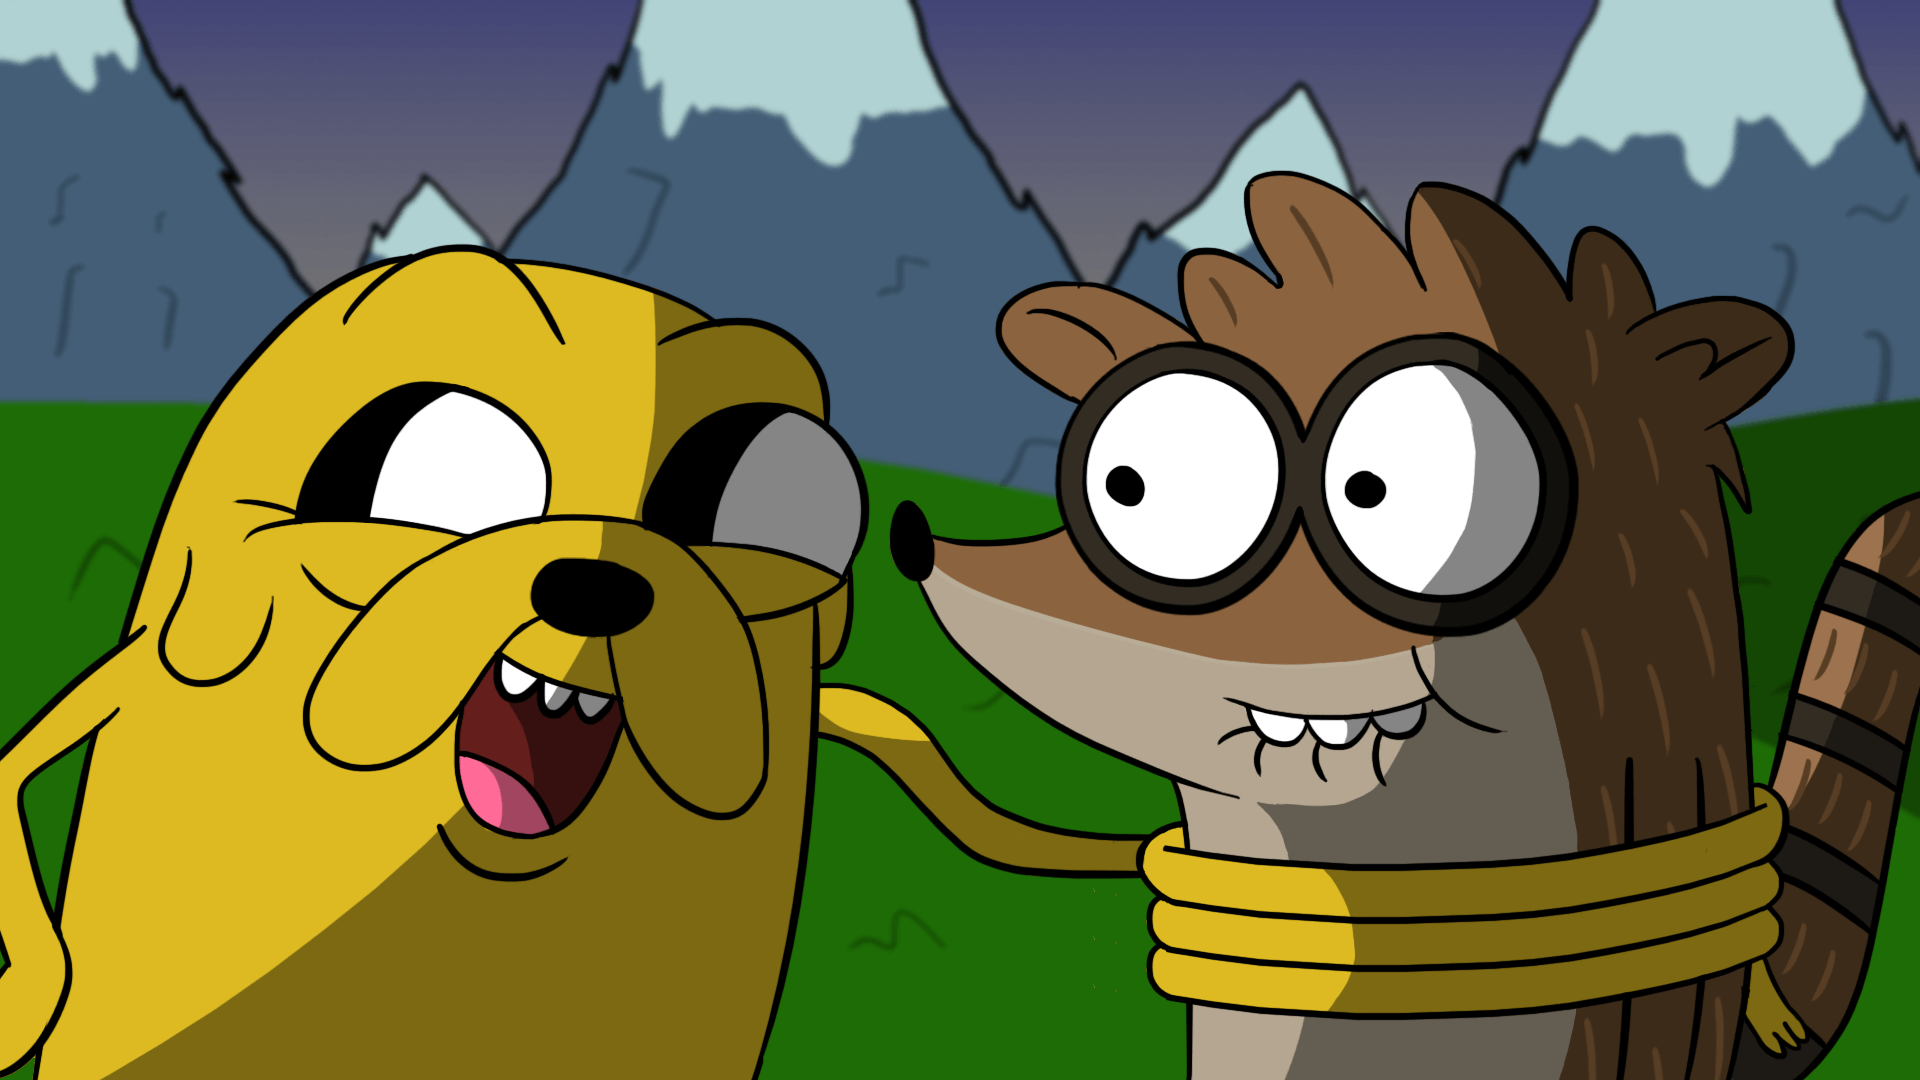 Jake and rigby! :)